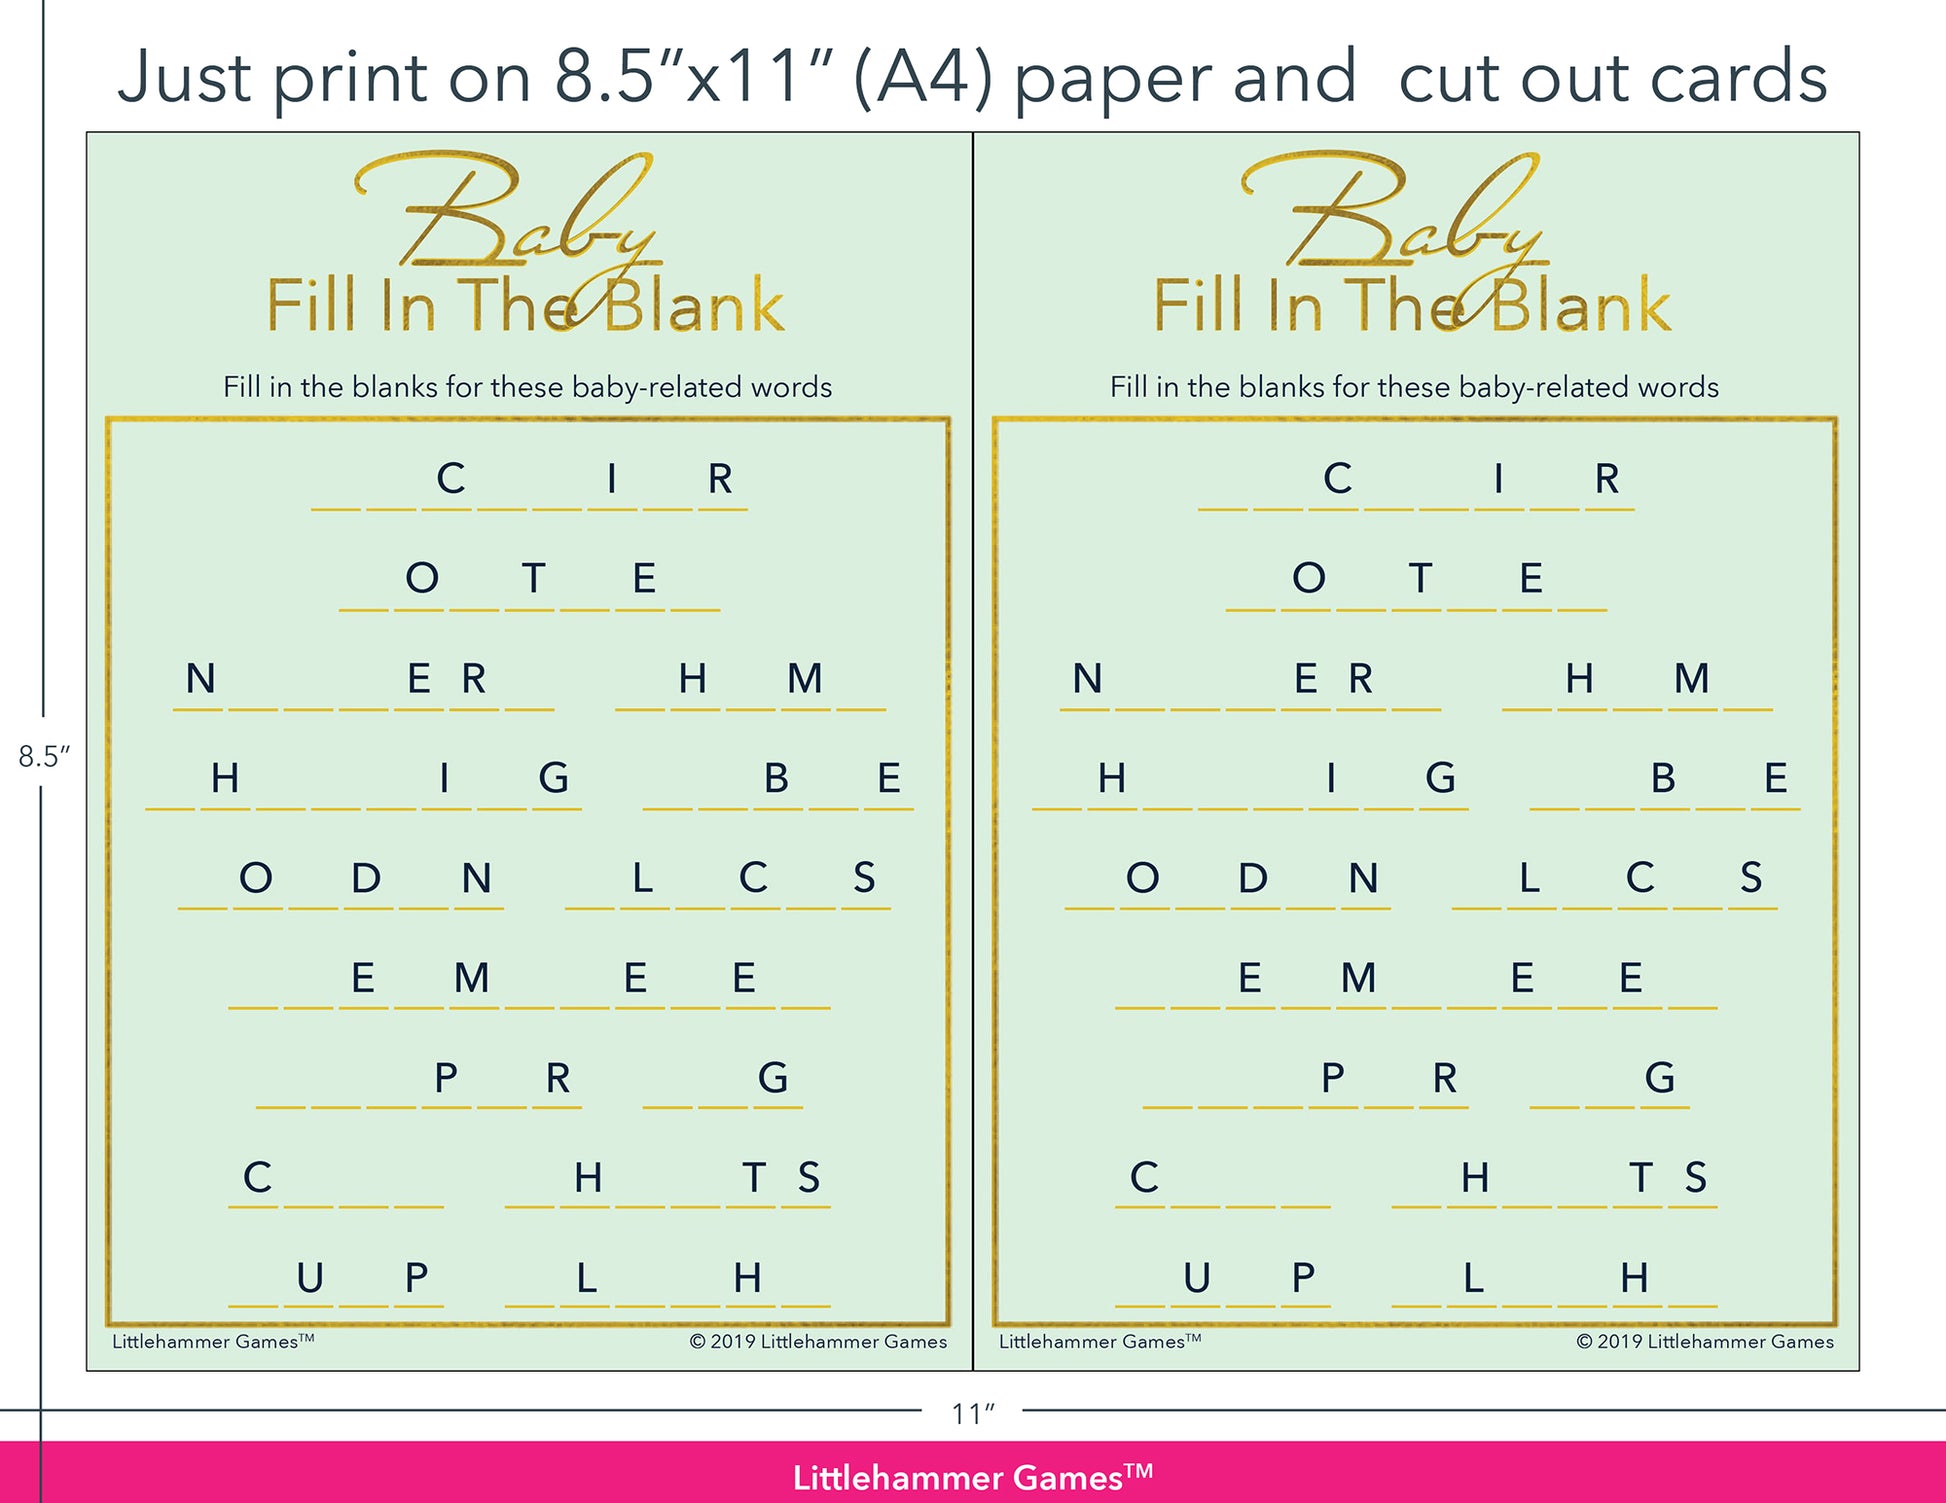 Baby Fill in the Blank mint and gold game cards with printing instructions